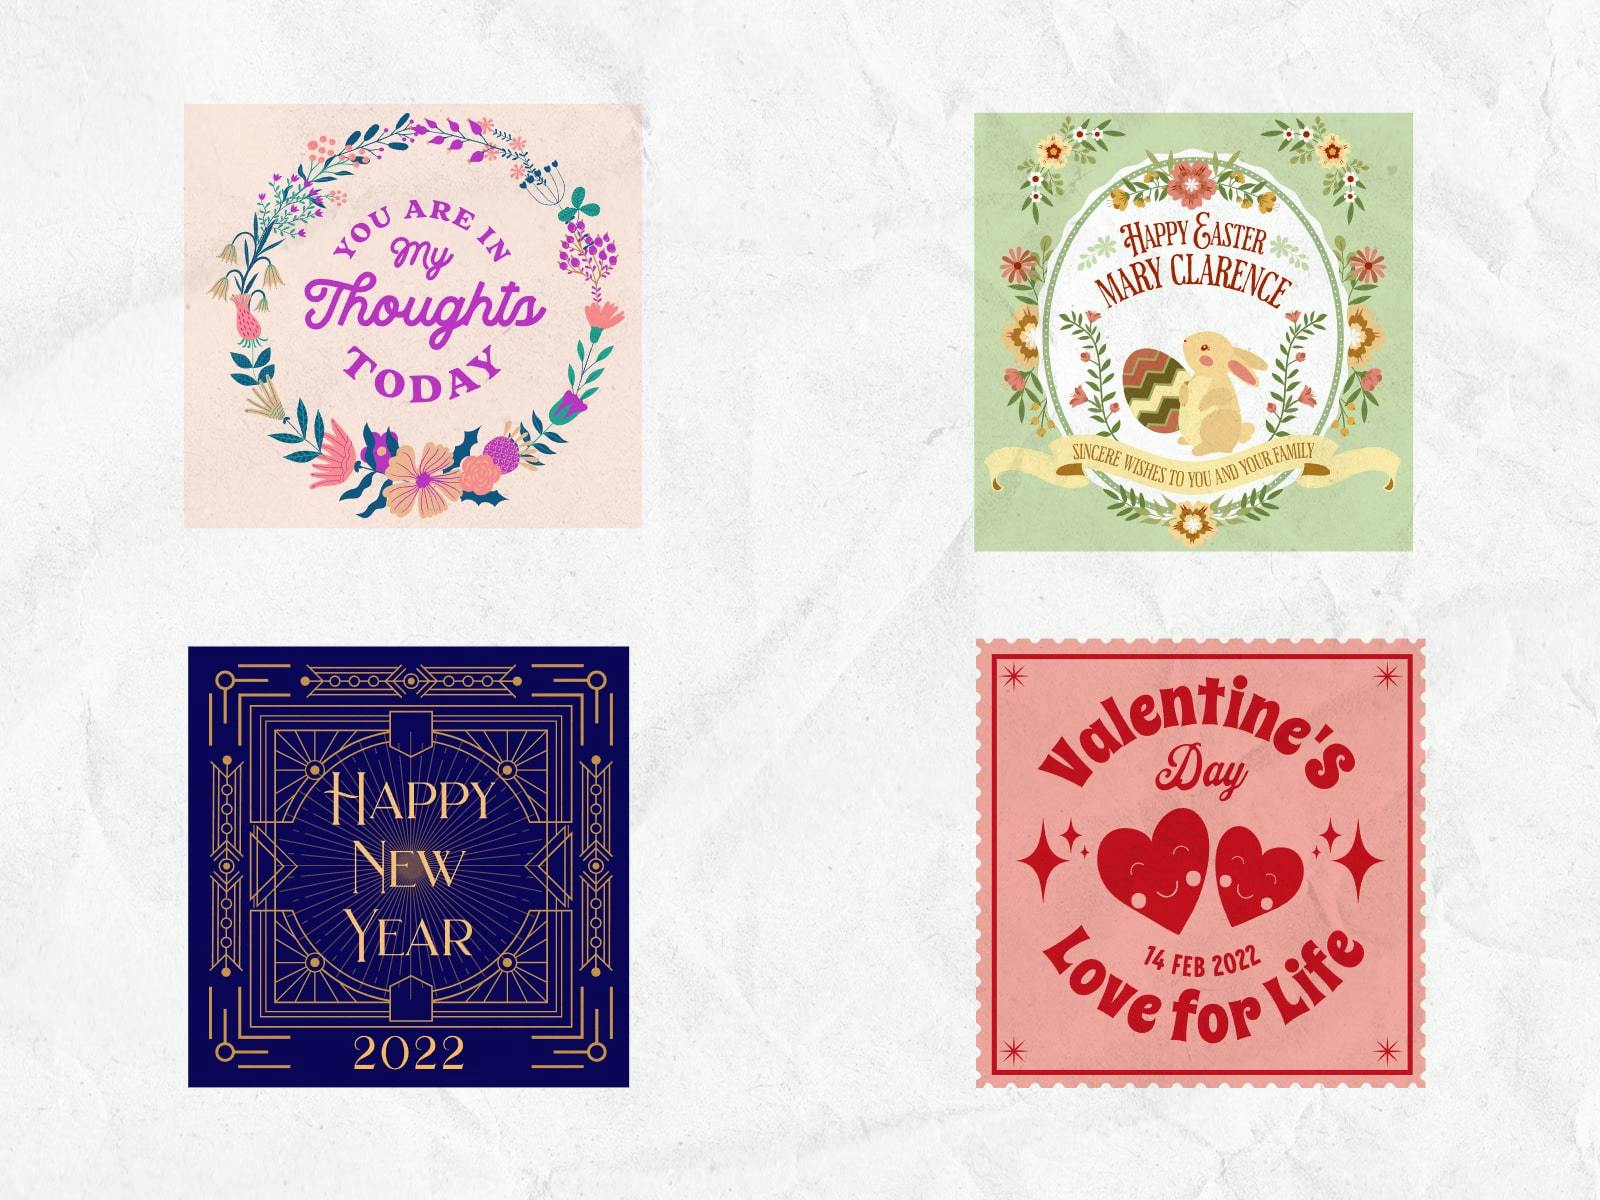 Greeting Card: Collection of customizable greeting cards